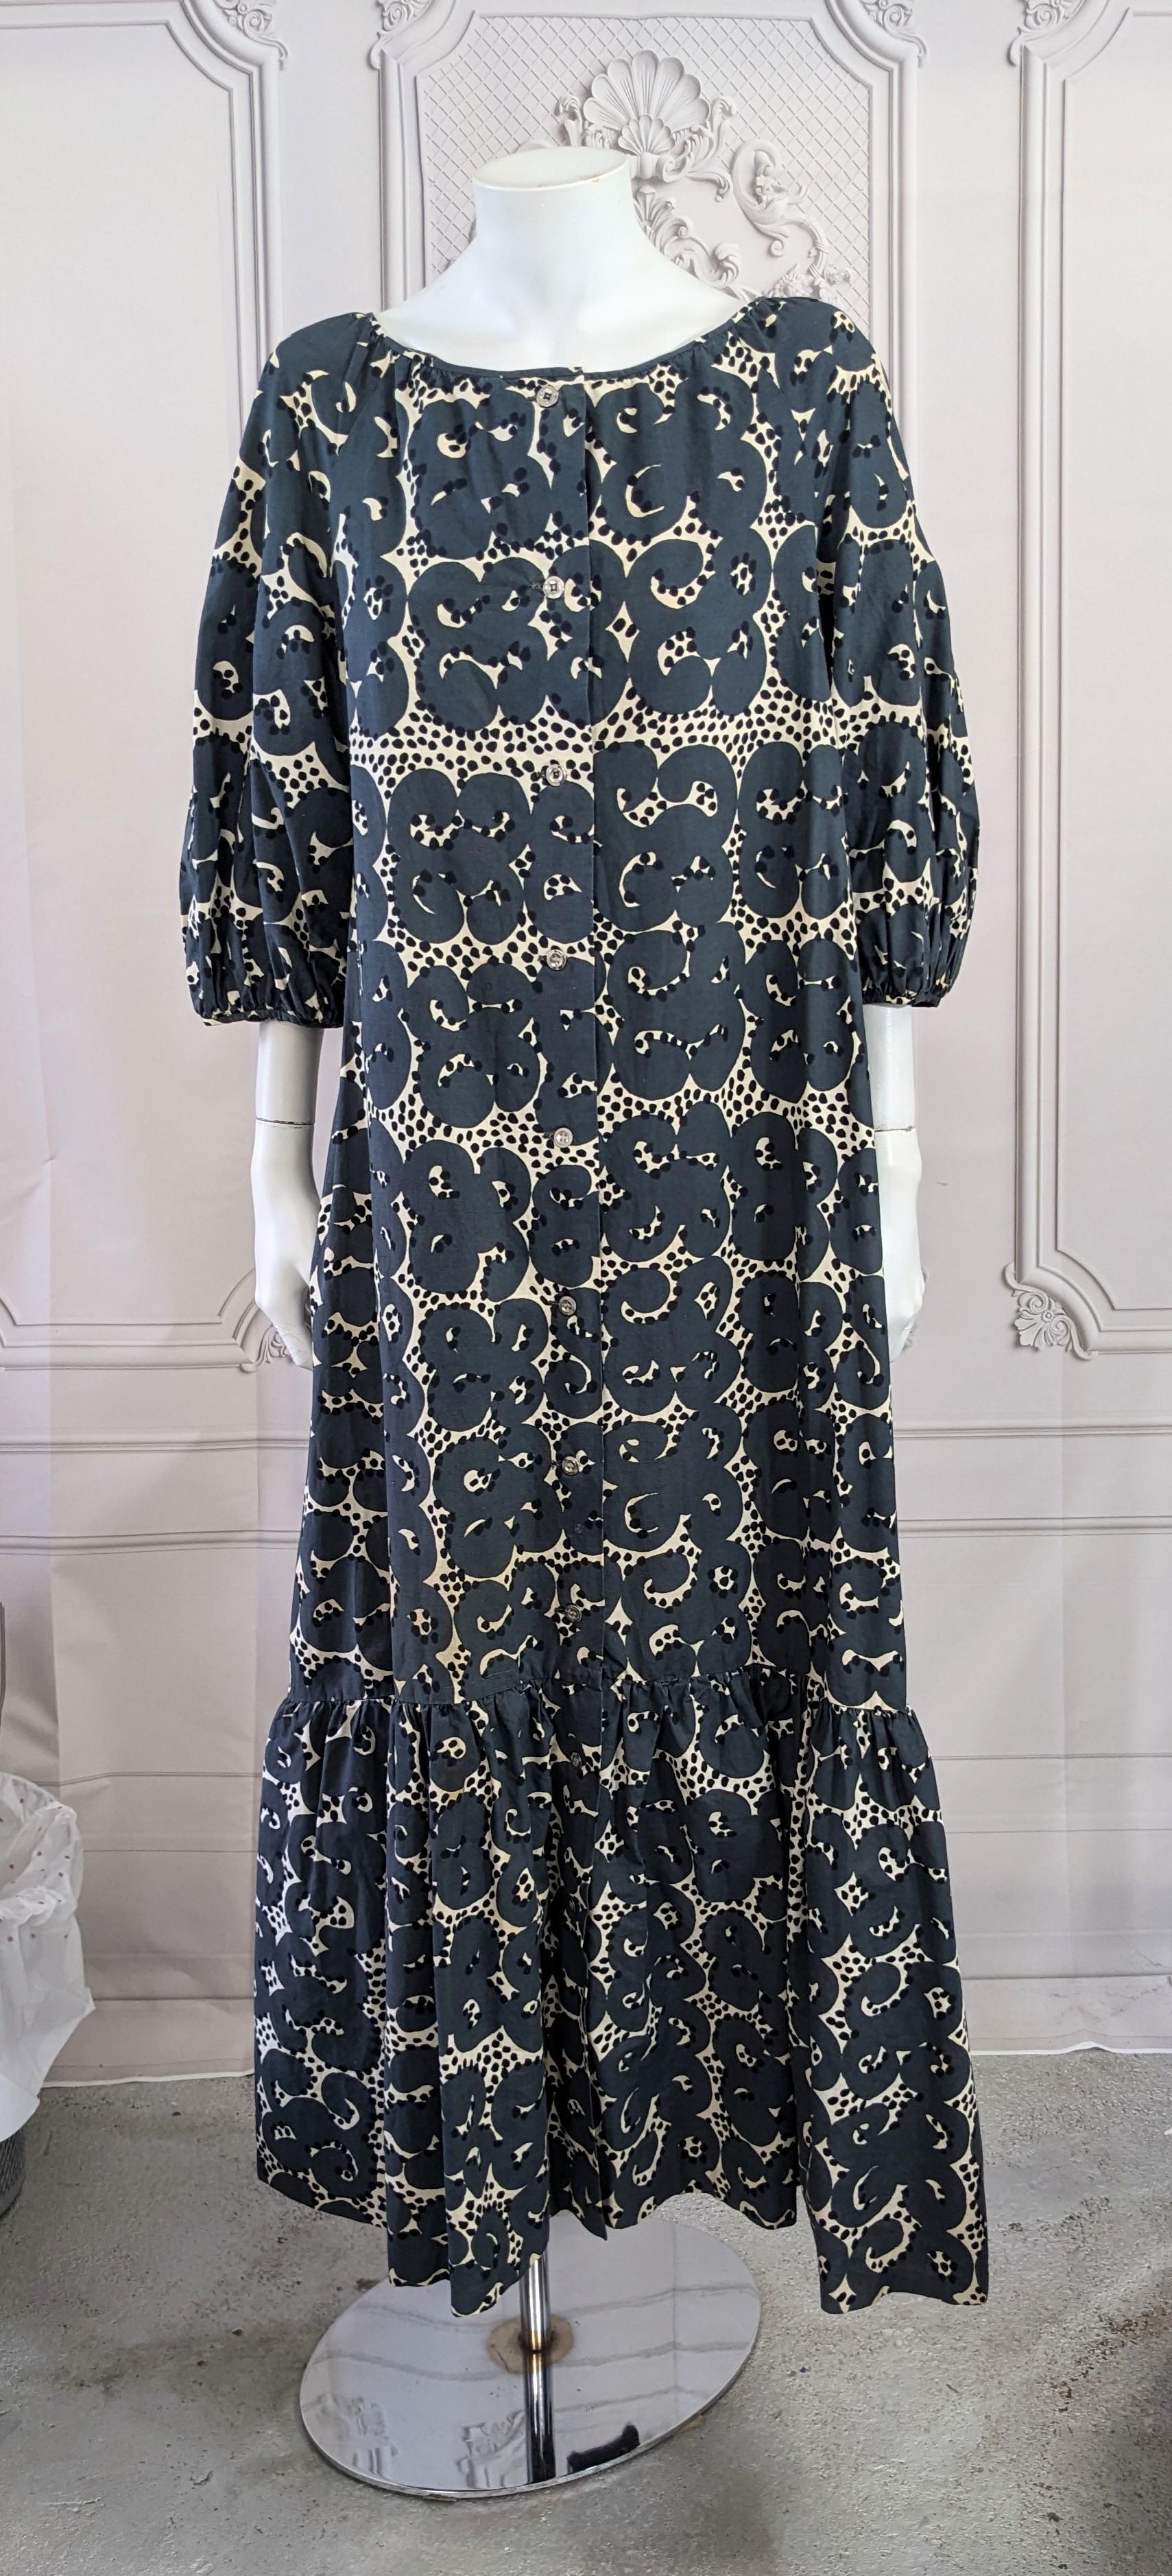 Charming Cotton Poplin Marimekko Maxi Ruffle Dress from the 1970's. Super graphic on grey ground with ruffled hem and puffed sleeves.
Metal button front closure down front. Hem ruffle and sleeves are backed in a stiff linen to maintain the fullness